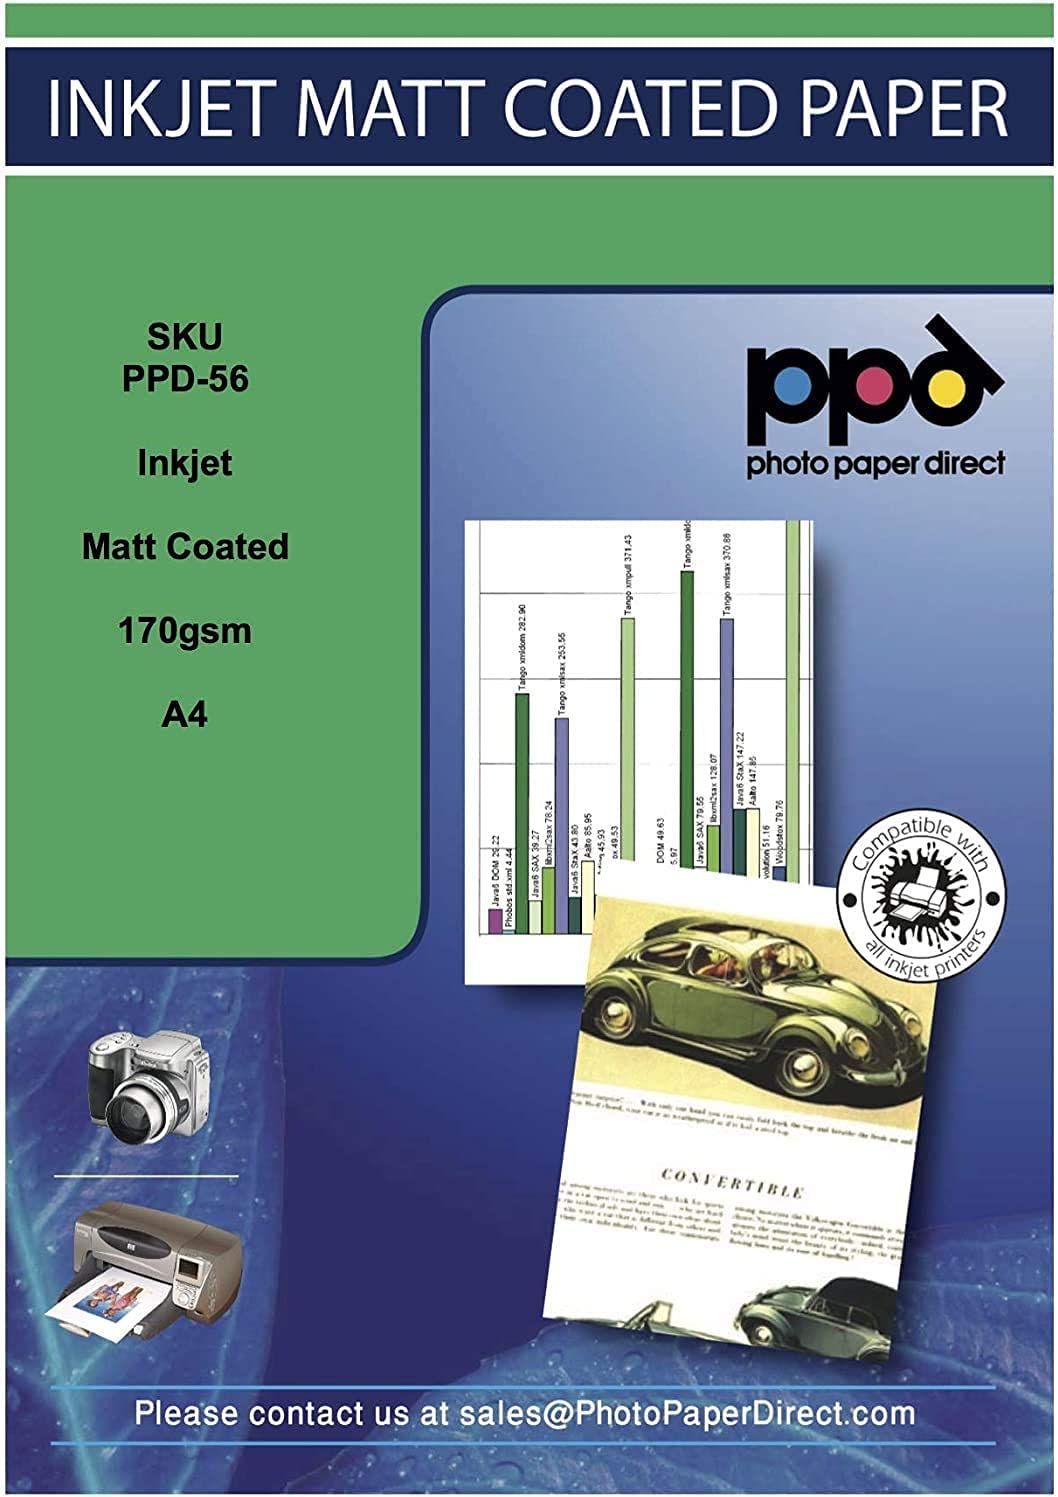 PPD Inkjet Matt Coated High Resolution Heavy Paper LTR 8.5x11 49lbs 180GSM 9.5mil x 100 Sheets (PPD056-100)